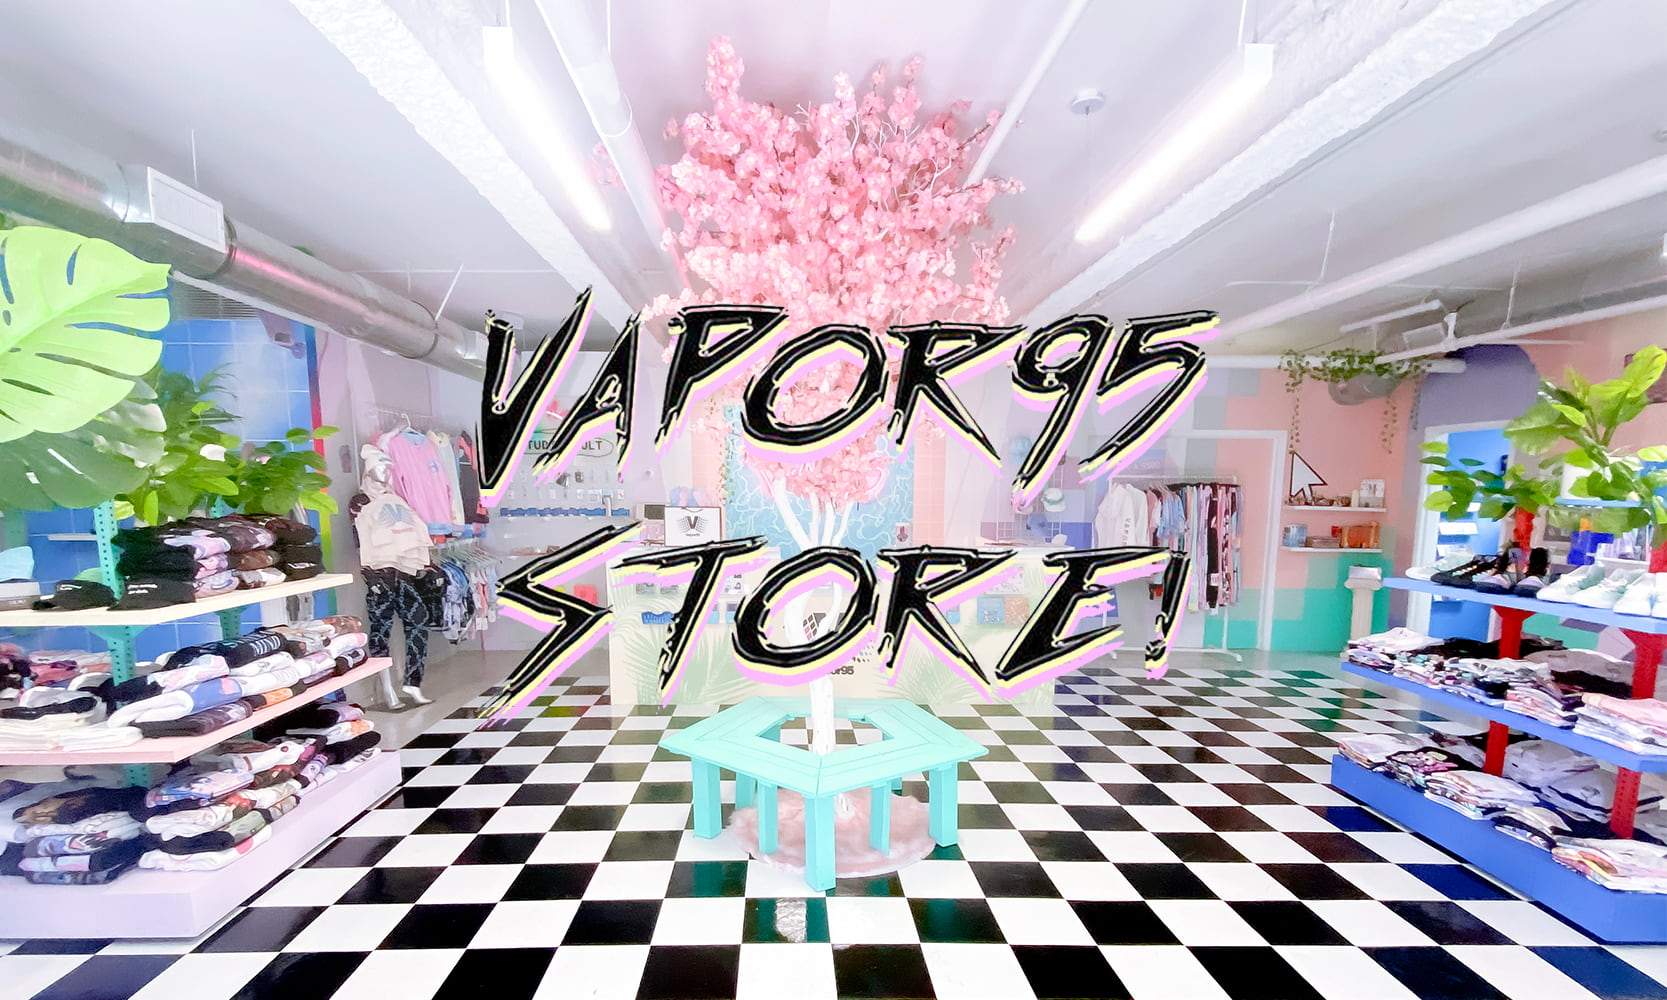 The Vapor95 Store Reopens!